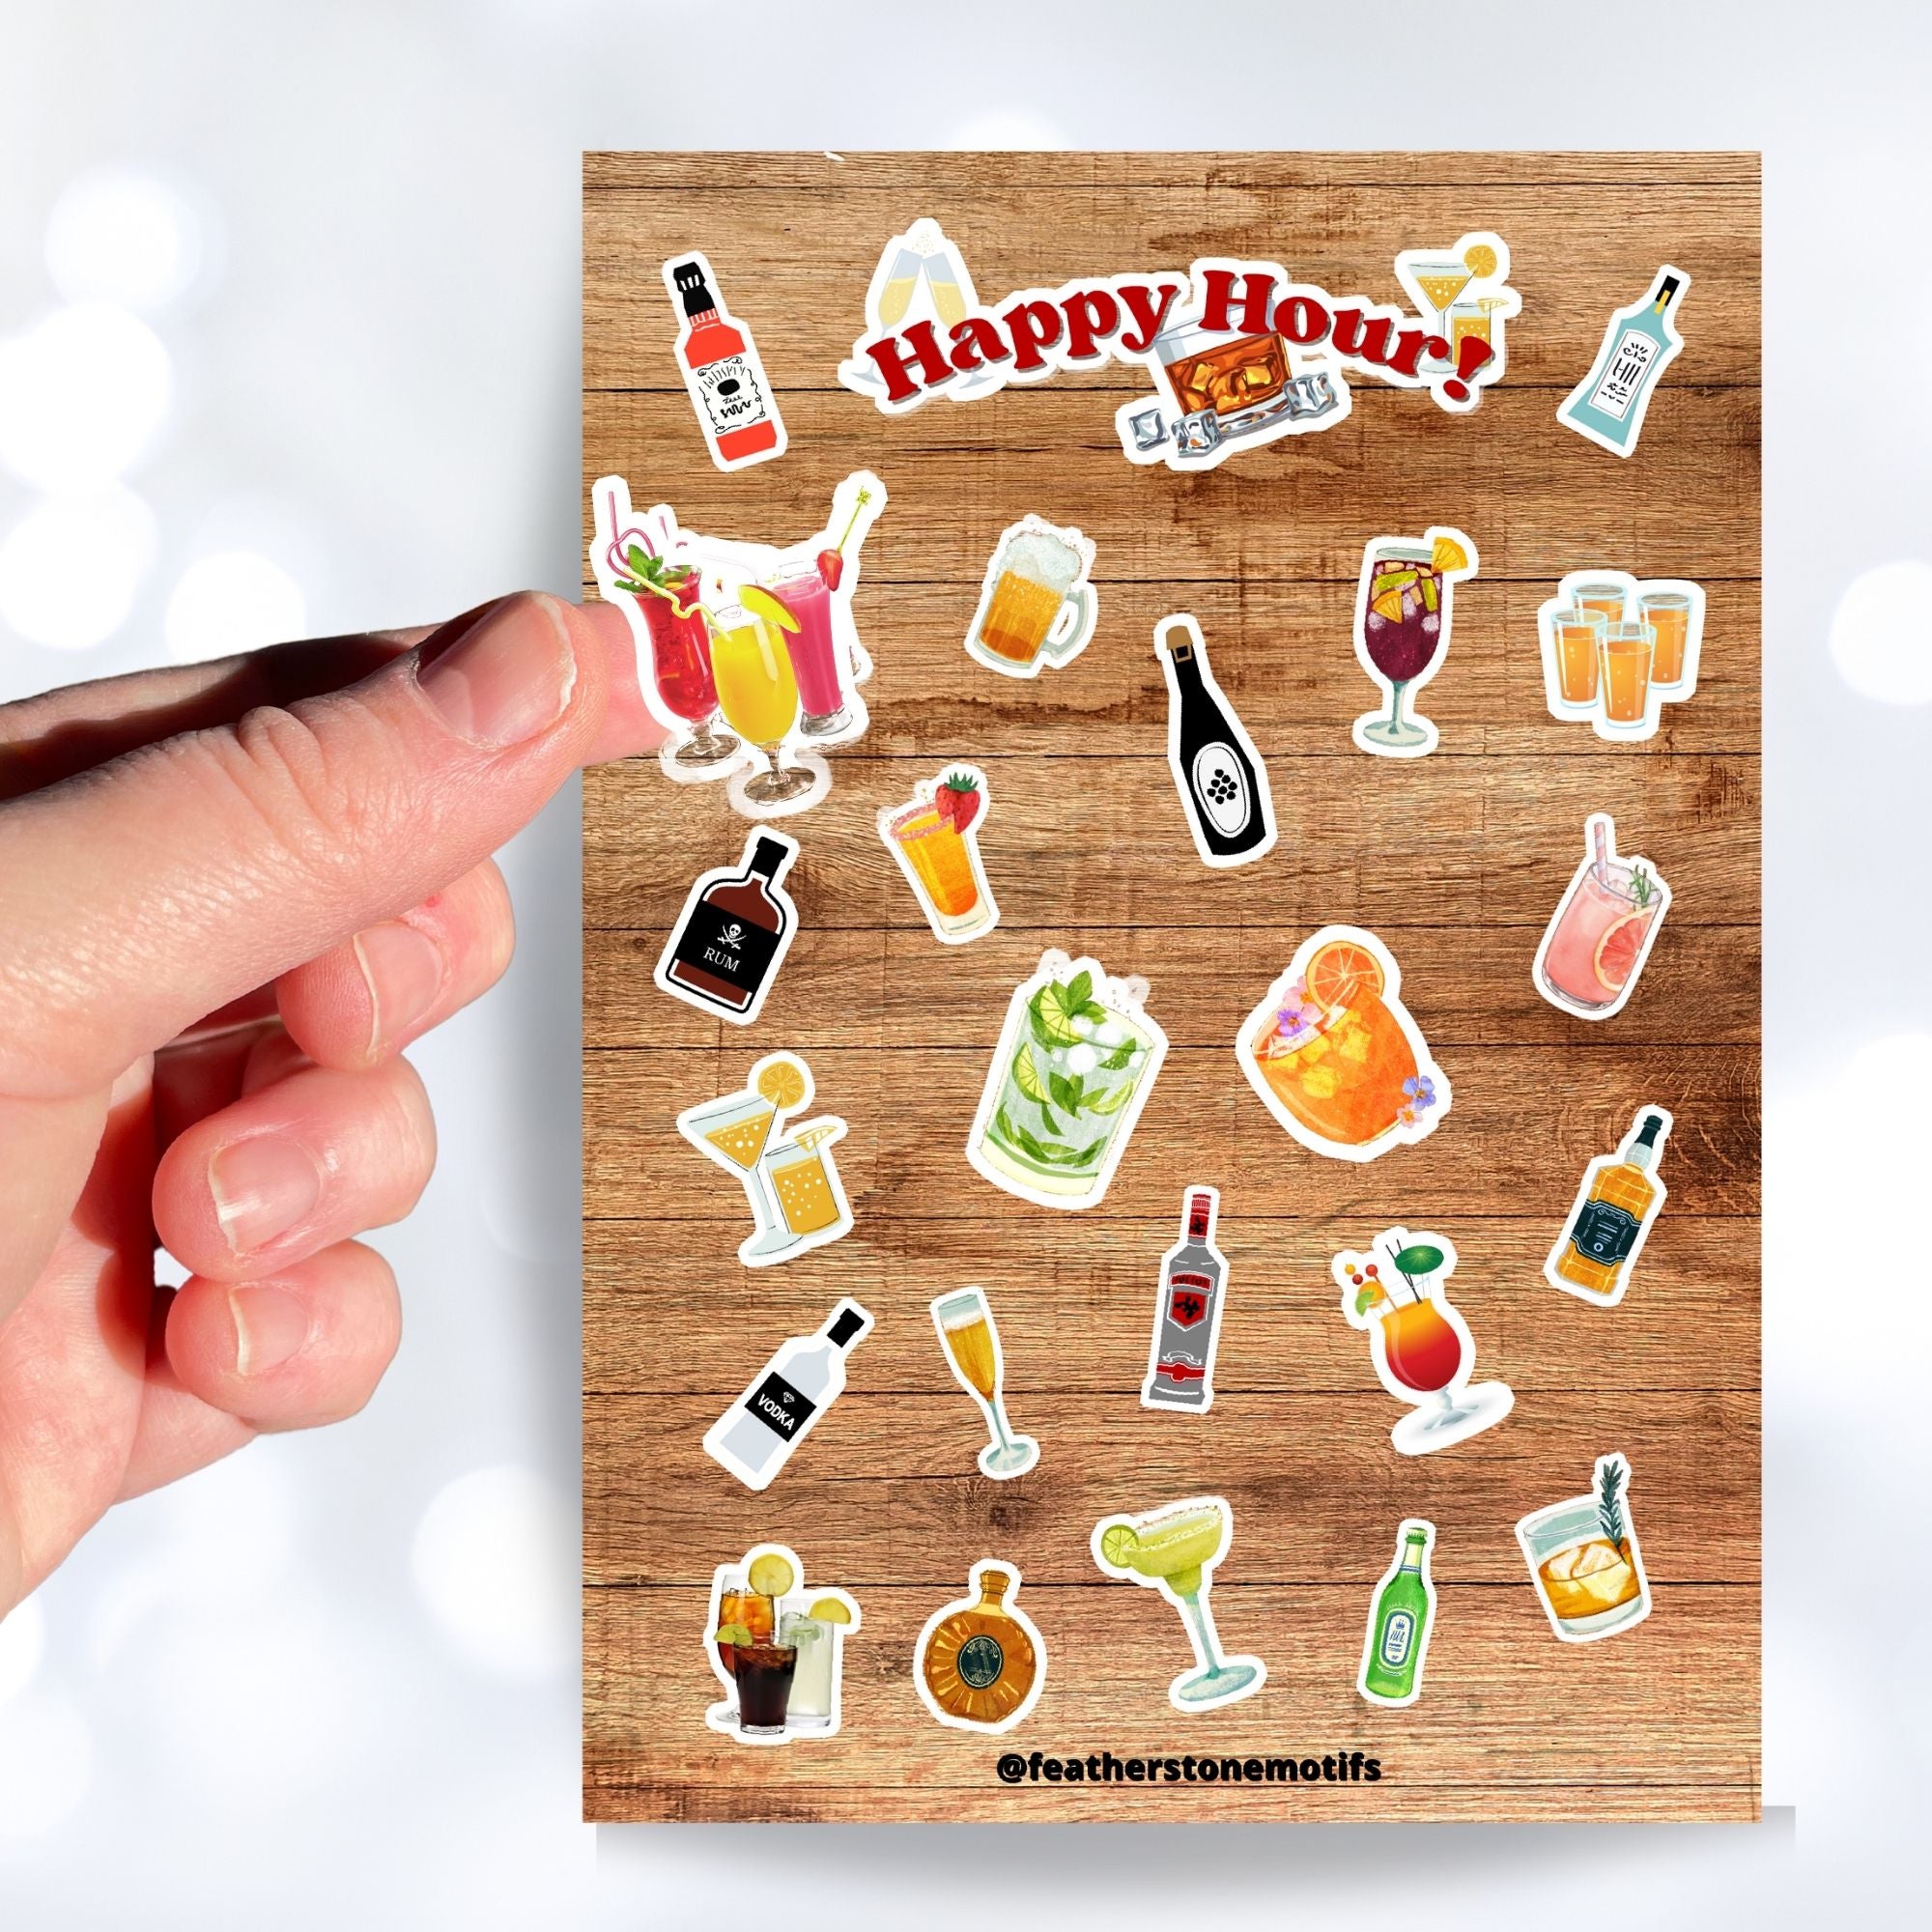 Cheers! Filled with sticker images of your favorite cocktails and adult beverages, this is for adults who can enjoy this sticker sheet responsibly! This image shows a hand holding a sticker of three tropical cocktails over the sticker sheet.